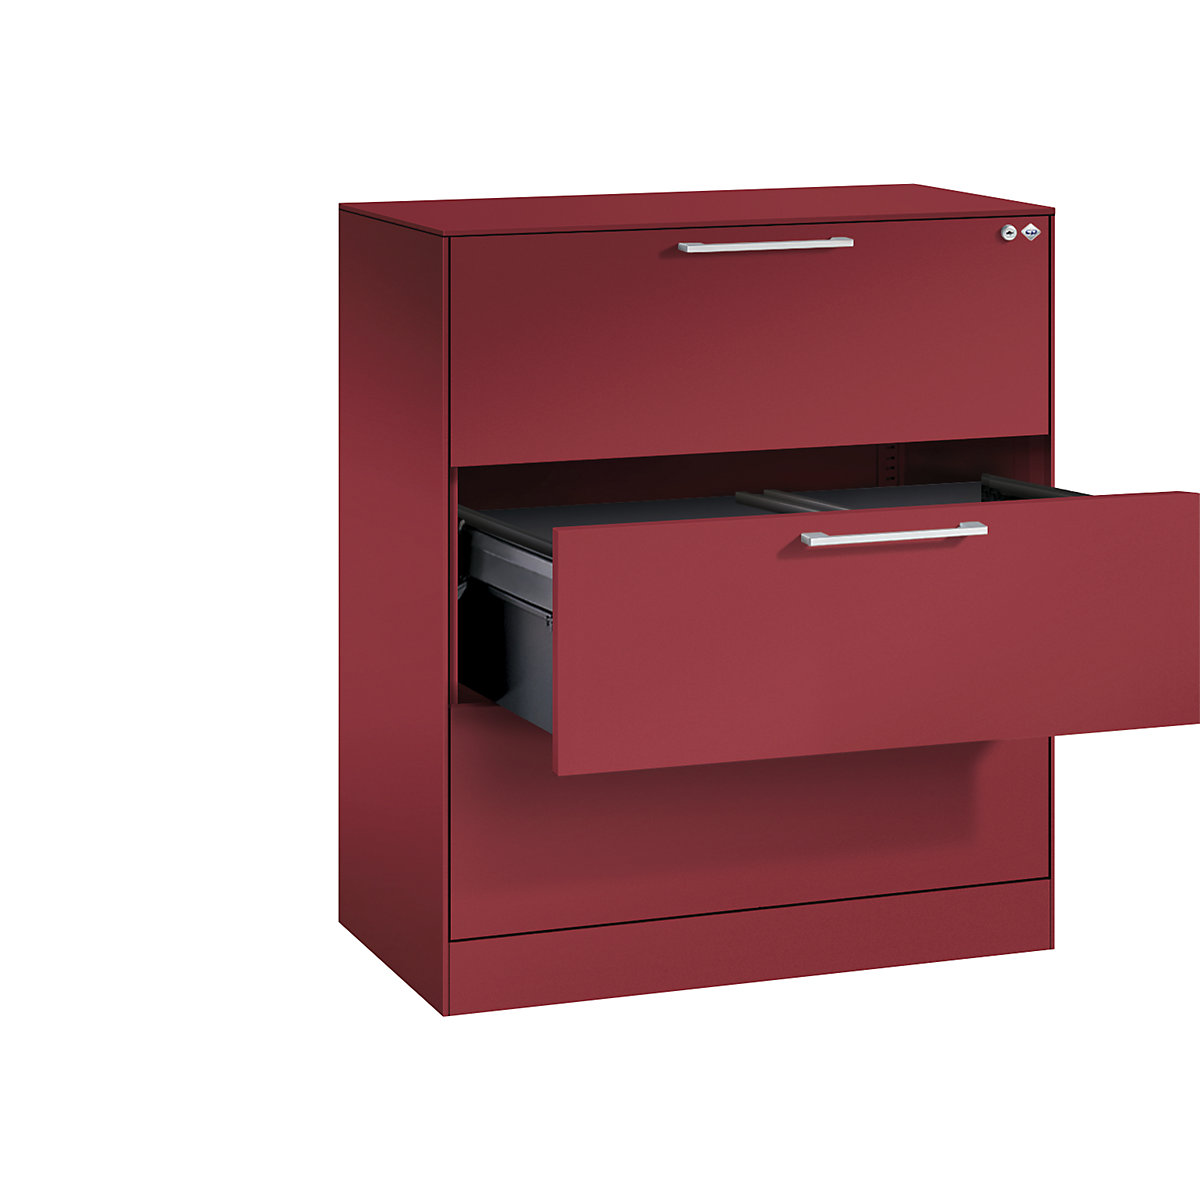 ASISTO suspension filing cabinet – C+P, width 800 mm, with 3 drawers, flame red/flame red-9